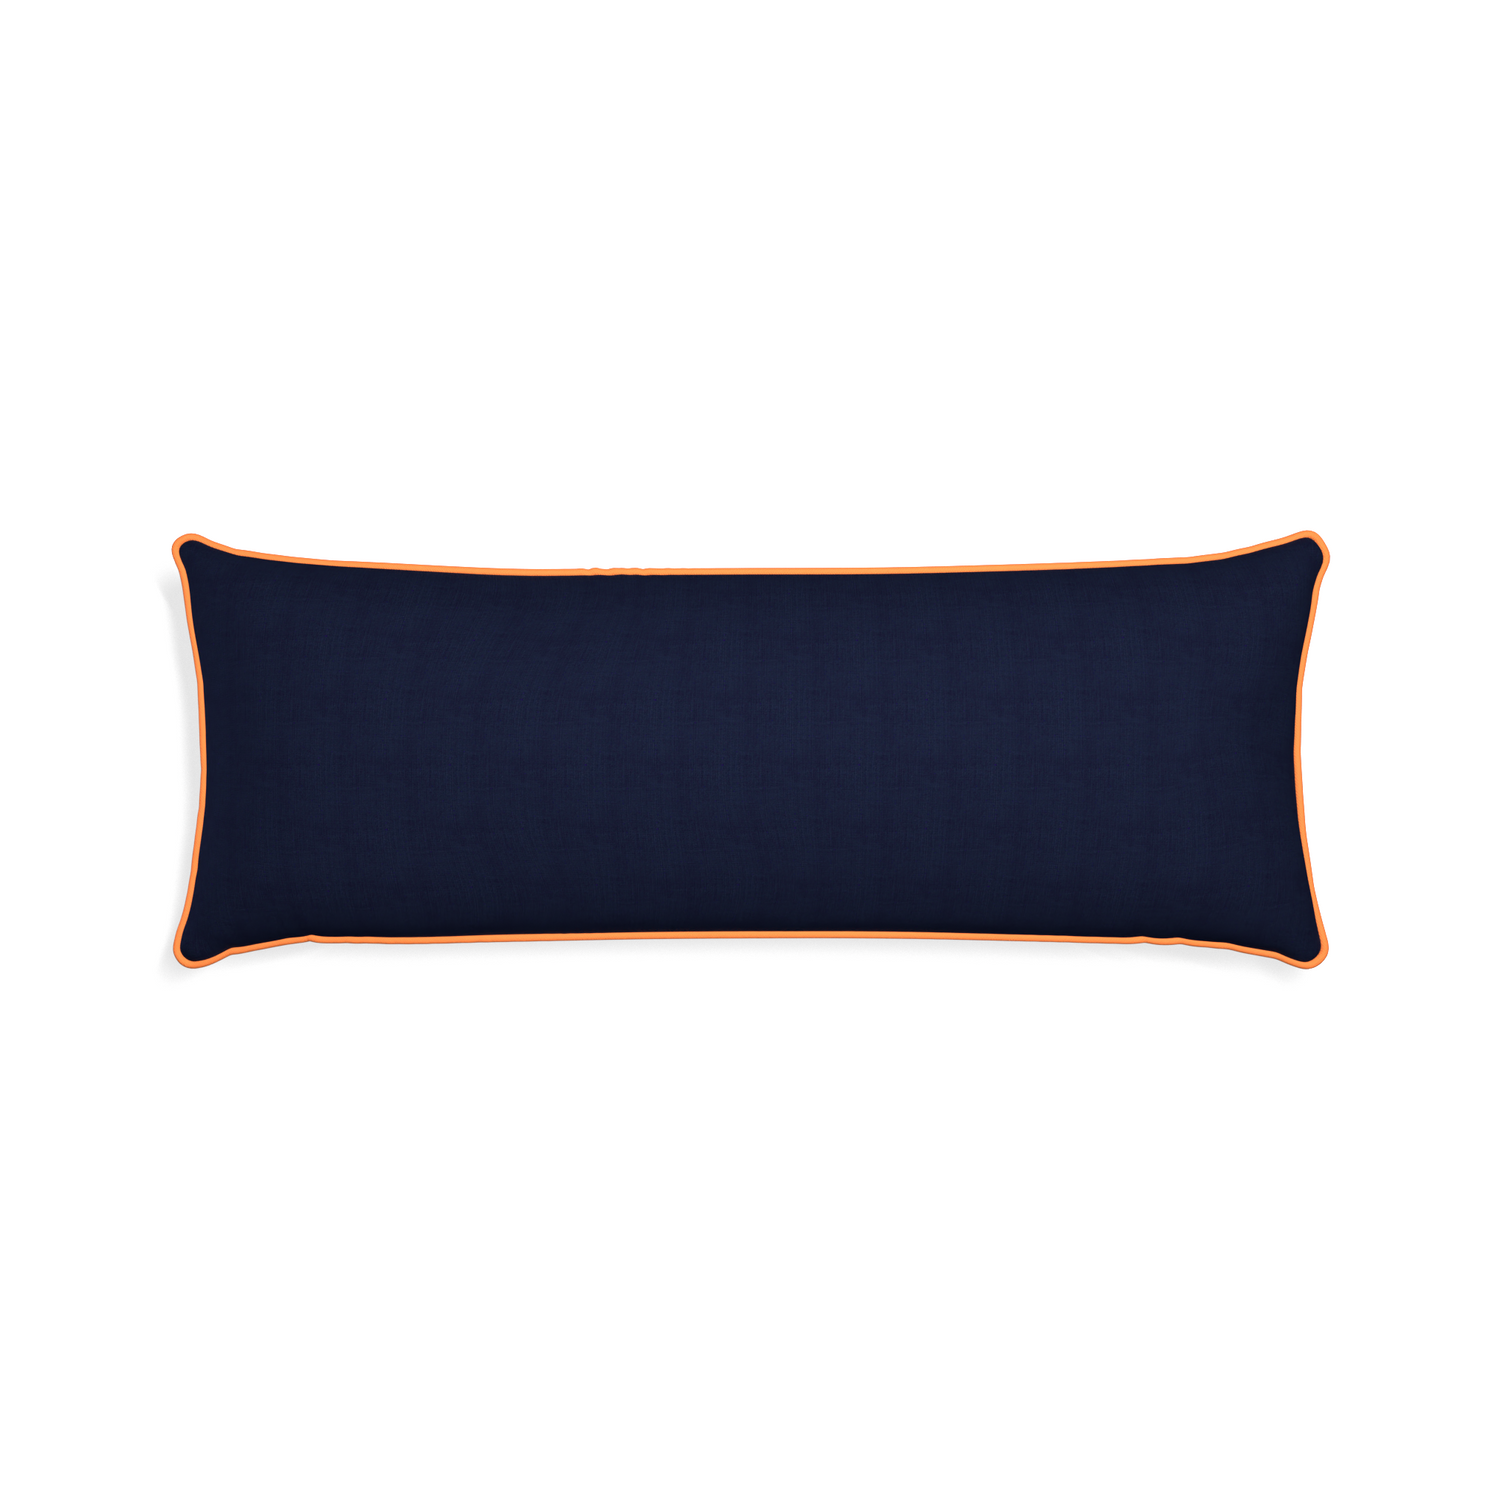 Xl-lumbar midnight custom pillow with clementine piping on white background